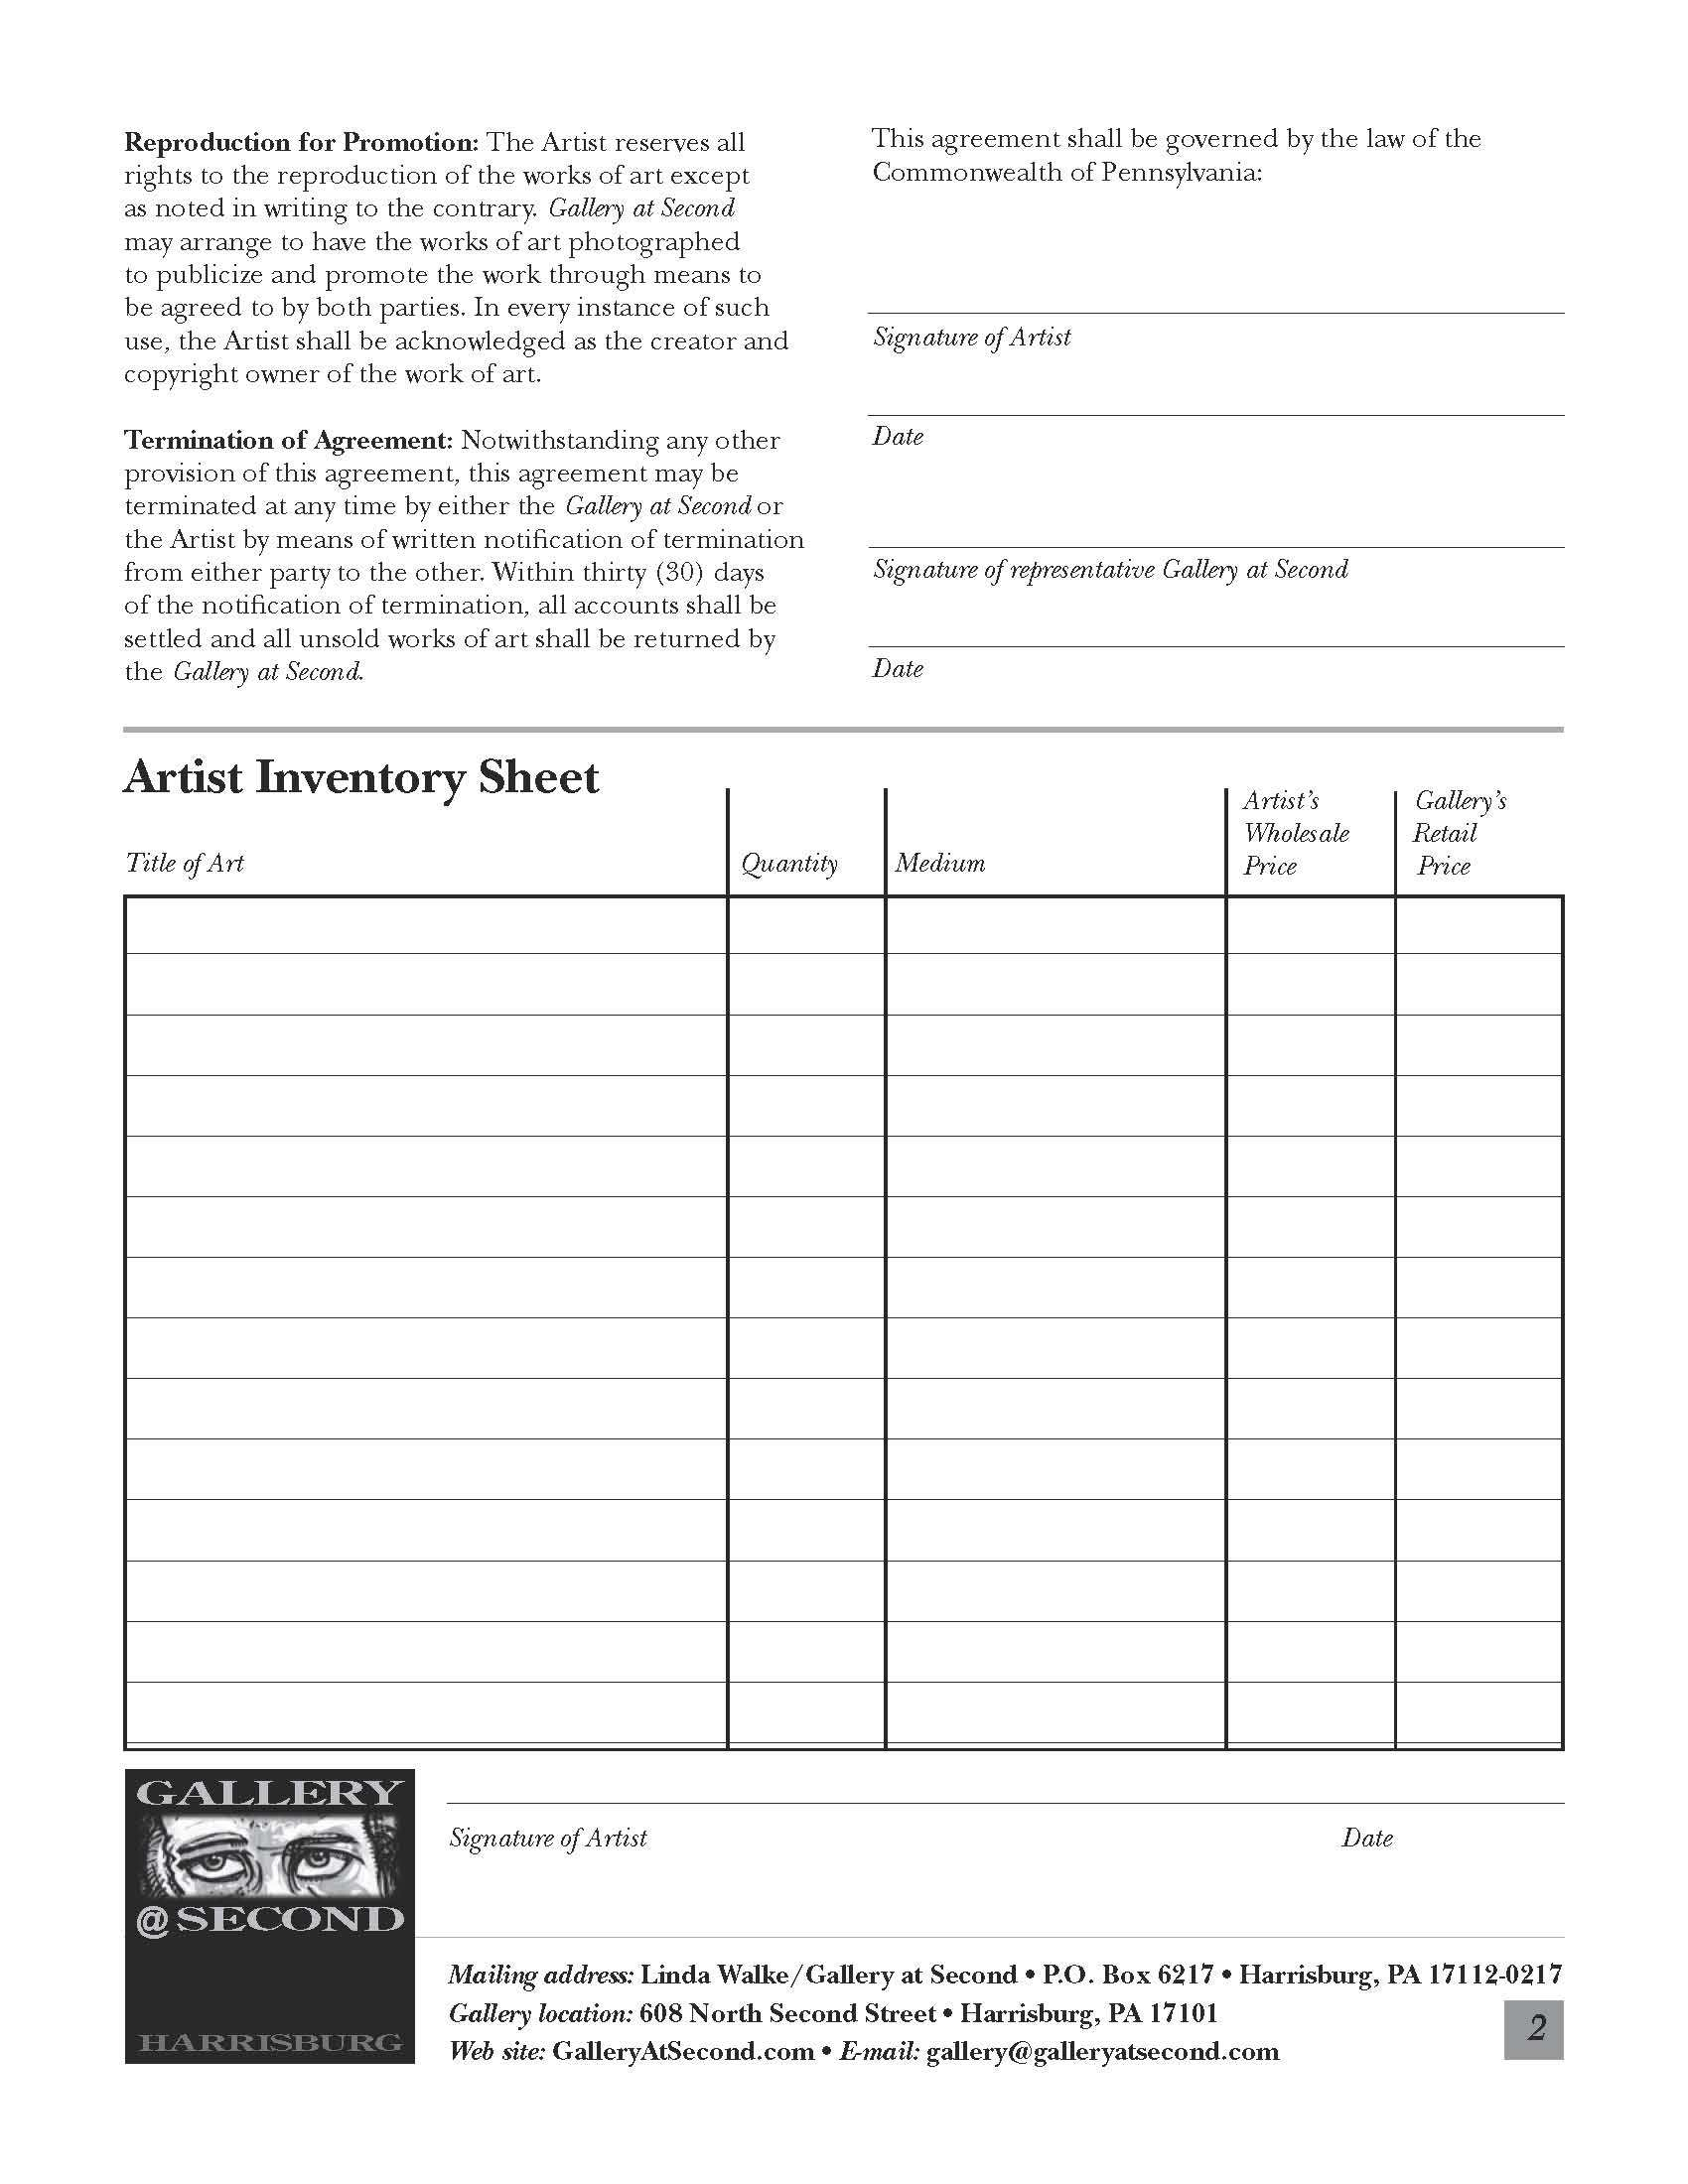 Gallery Consignment Agreement Consignment Agreement Pdf 79755 Agreement Consignment Agreement Form